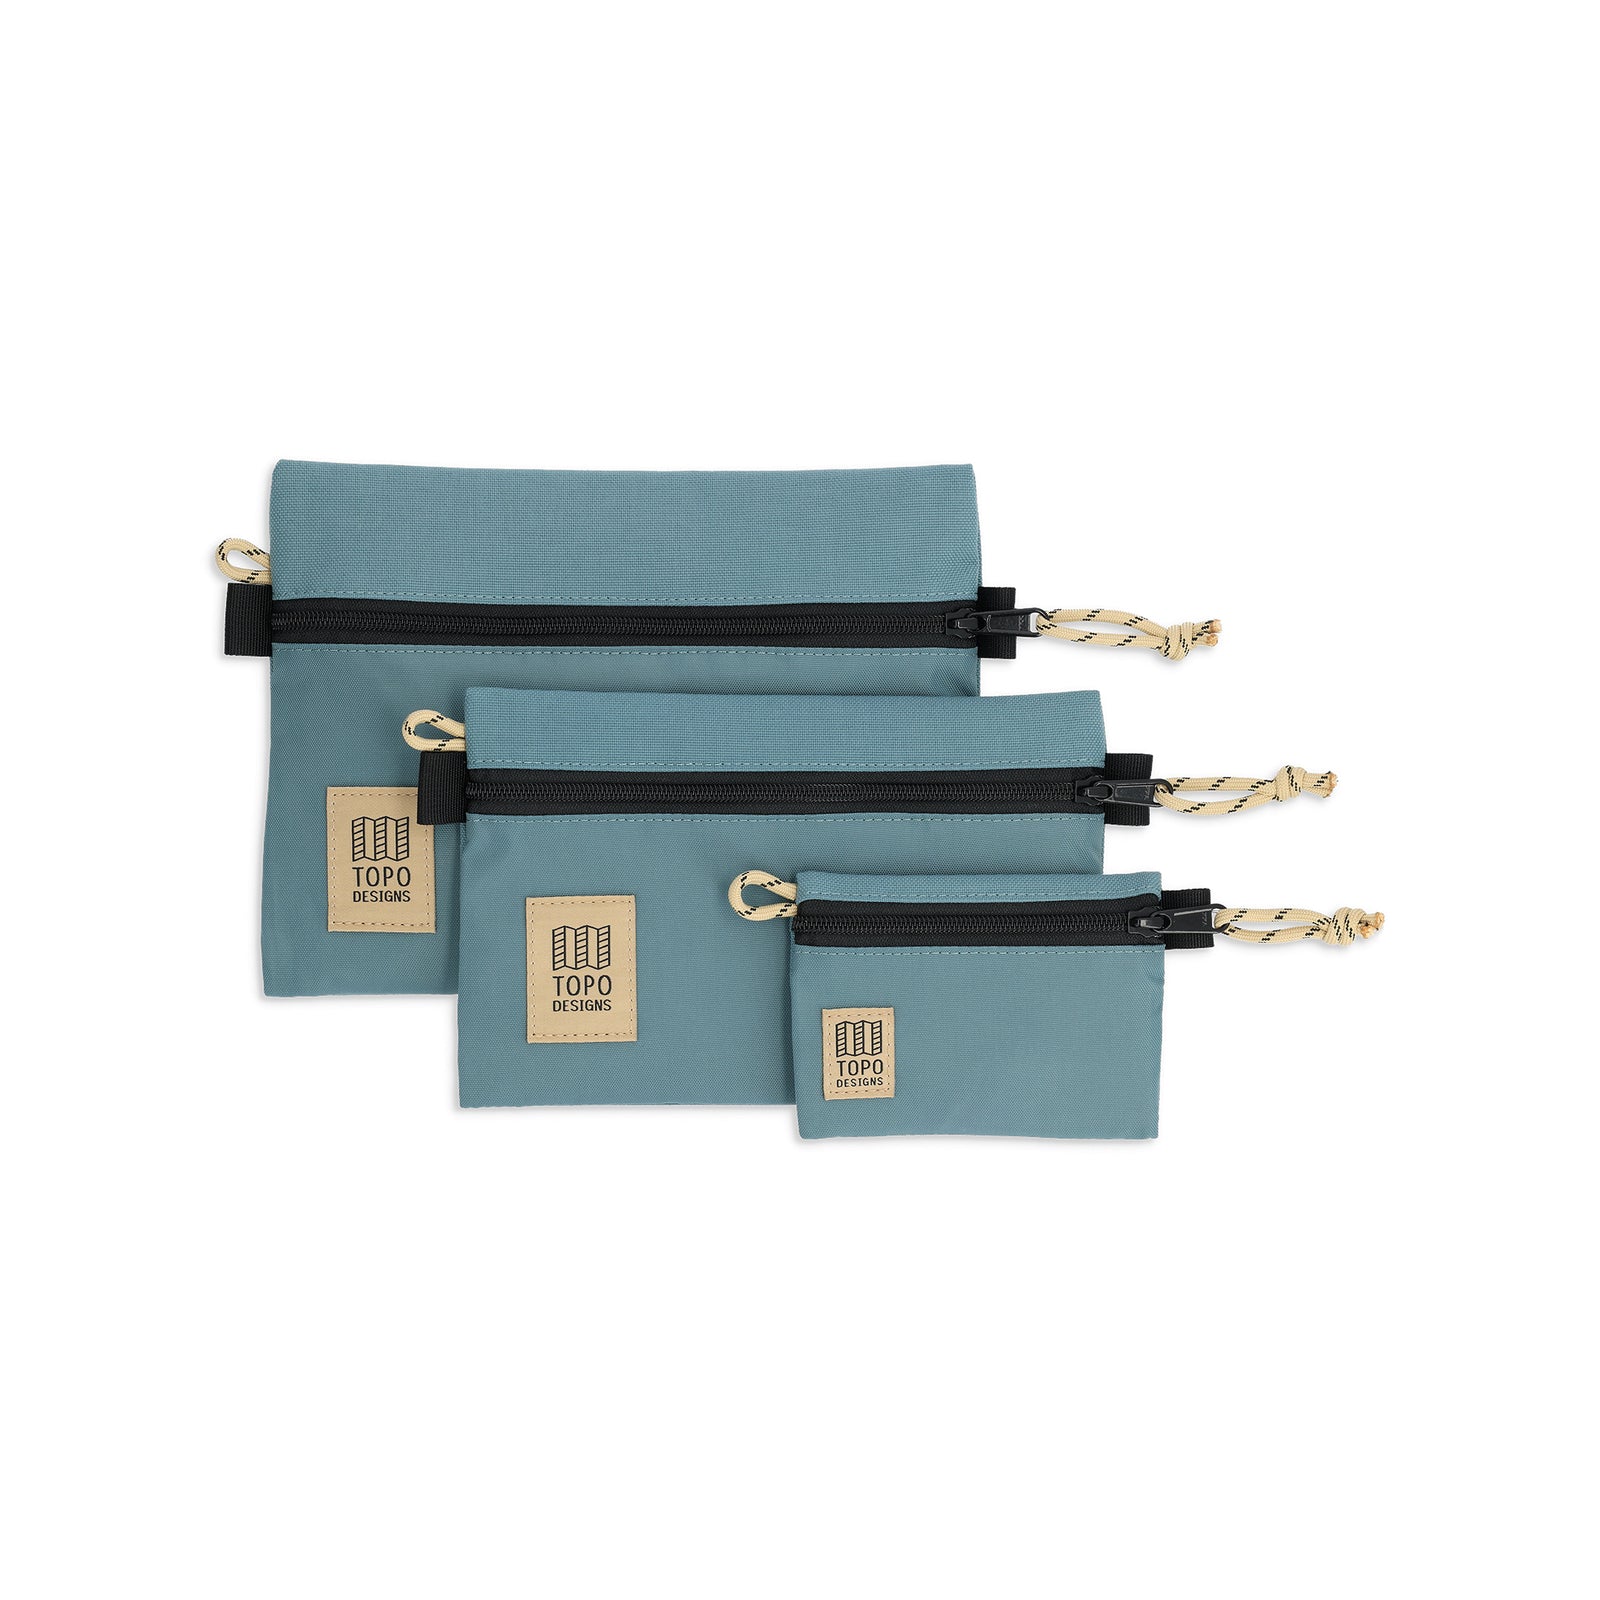 Front View of Topo Designs Accessory Bags in "Sea Pine"